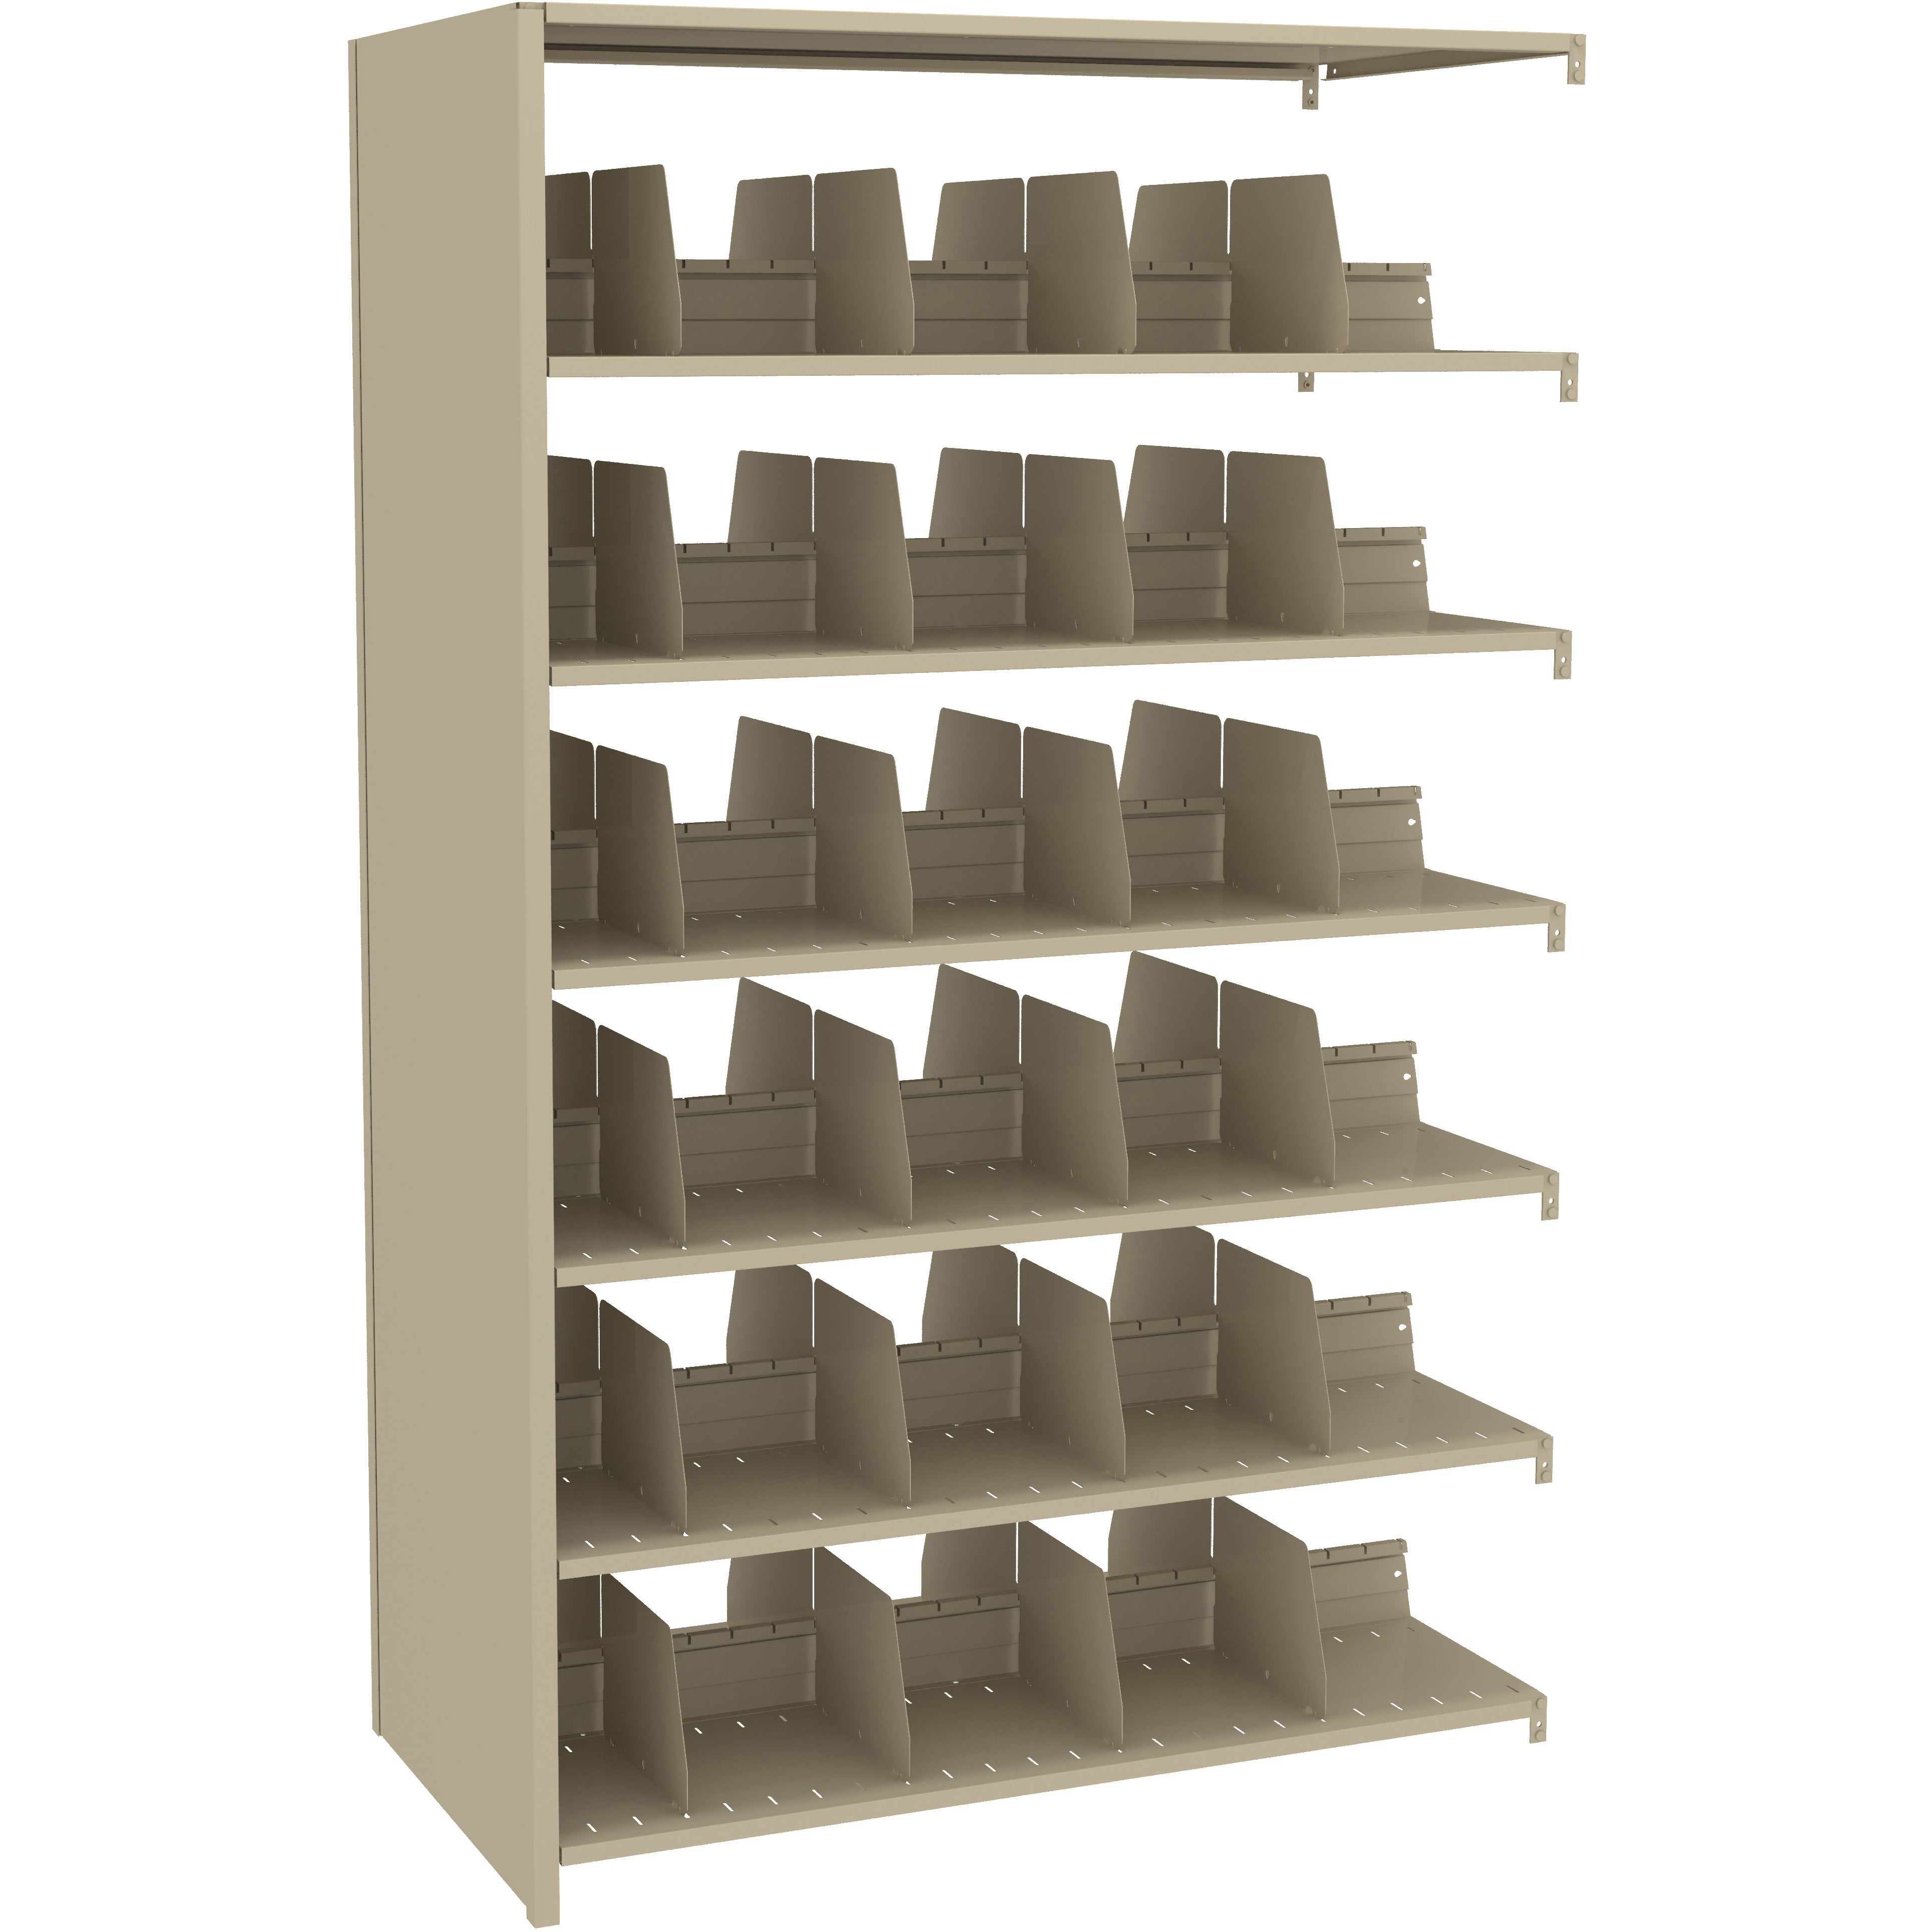 Tennsco 76" High Double Entry Imperial Shelving Adder Unit - 12 Openings, 247648AC